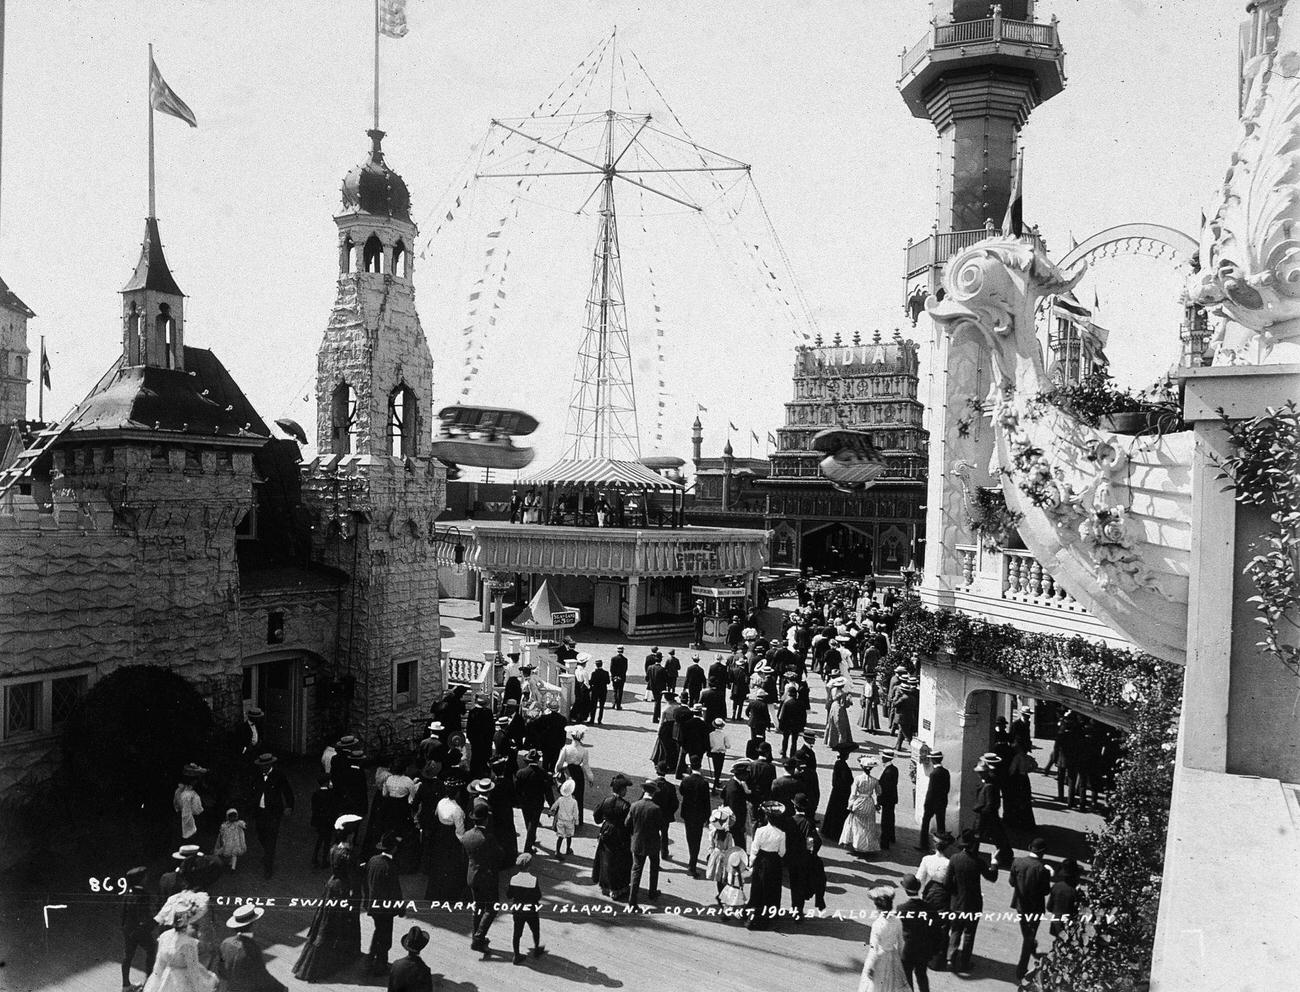 Crowd Leading To The Circle Swing At Luna Park, 1904